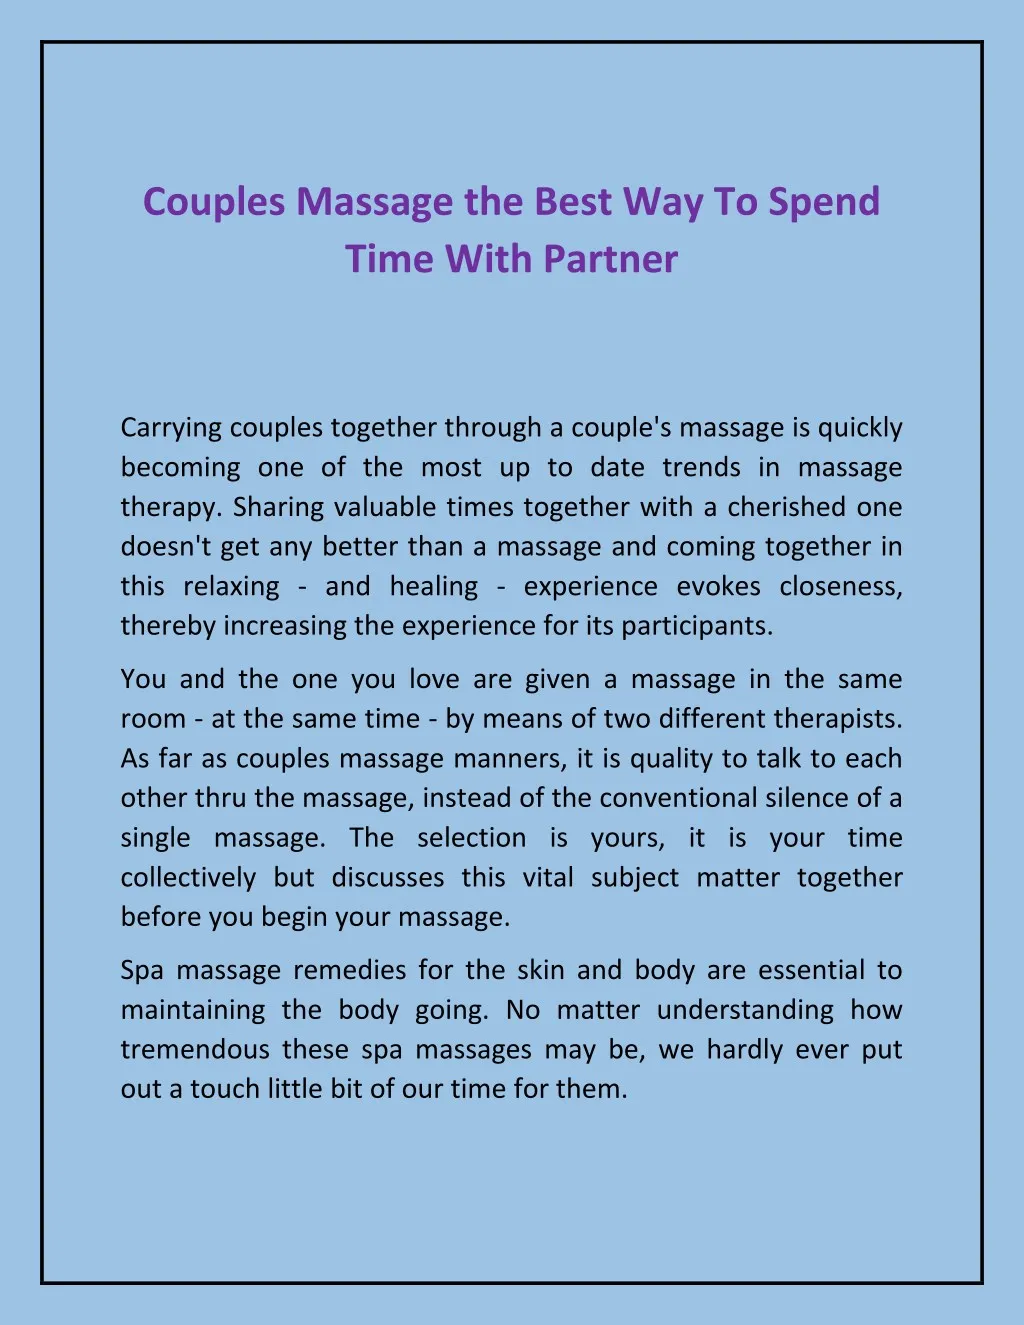 couples massage the best way to spend time with